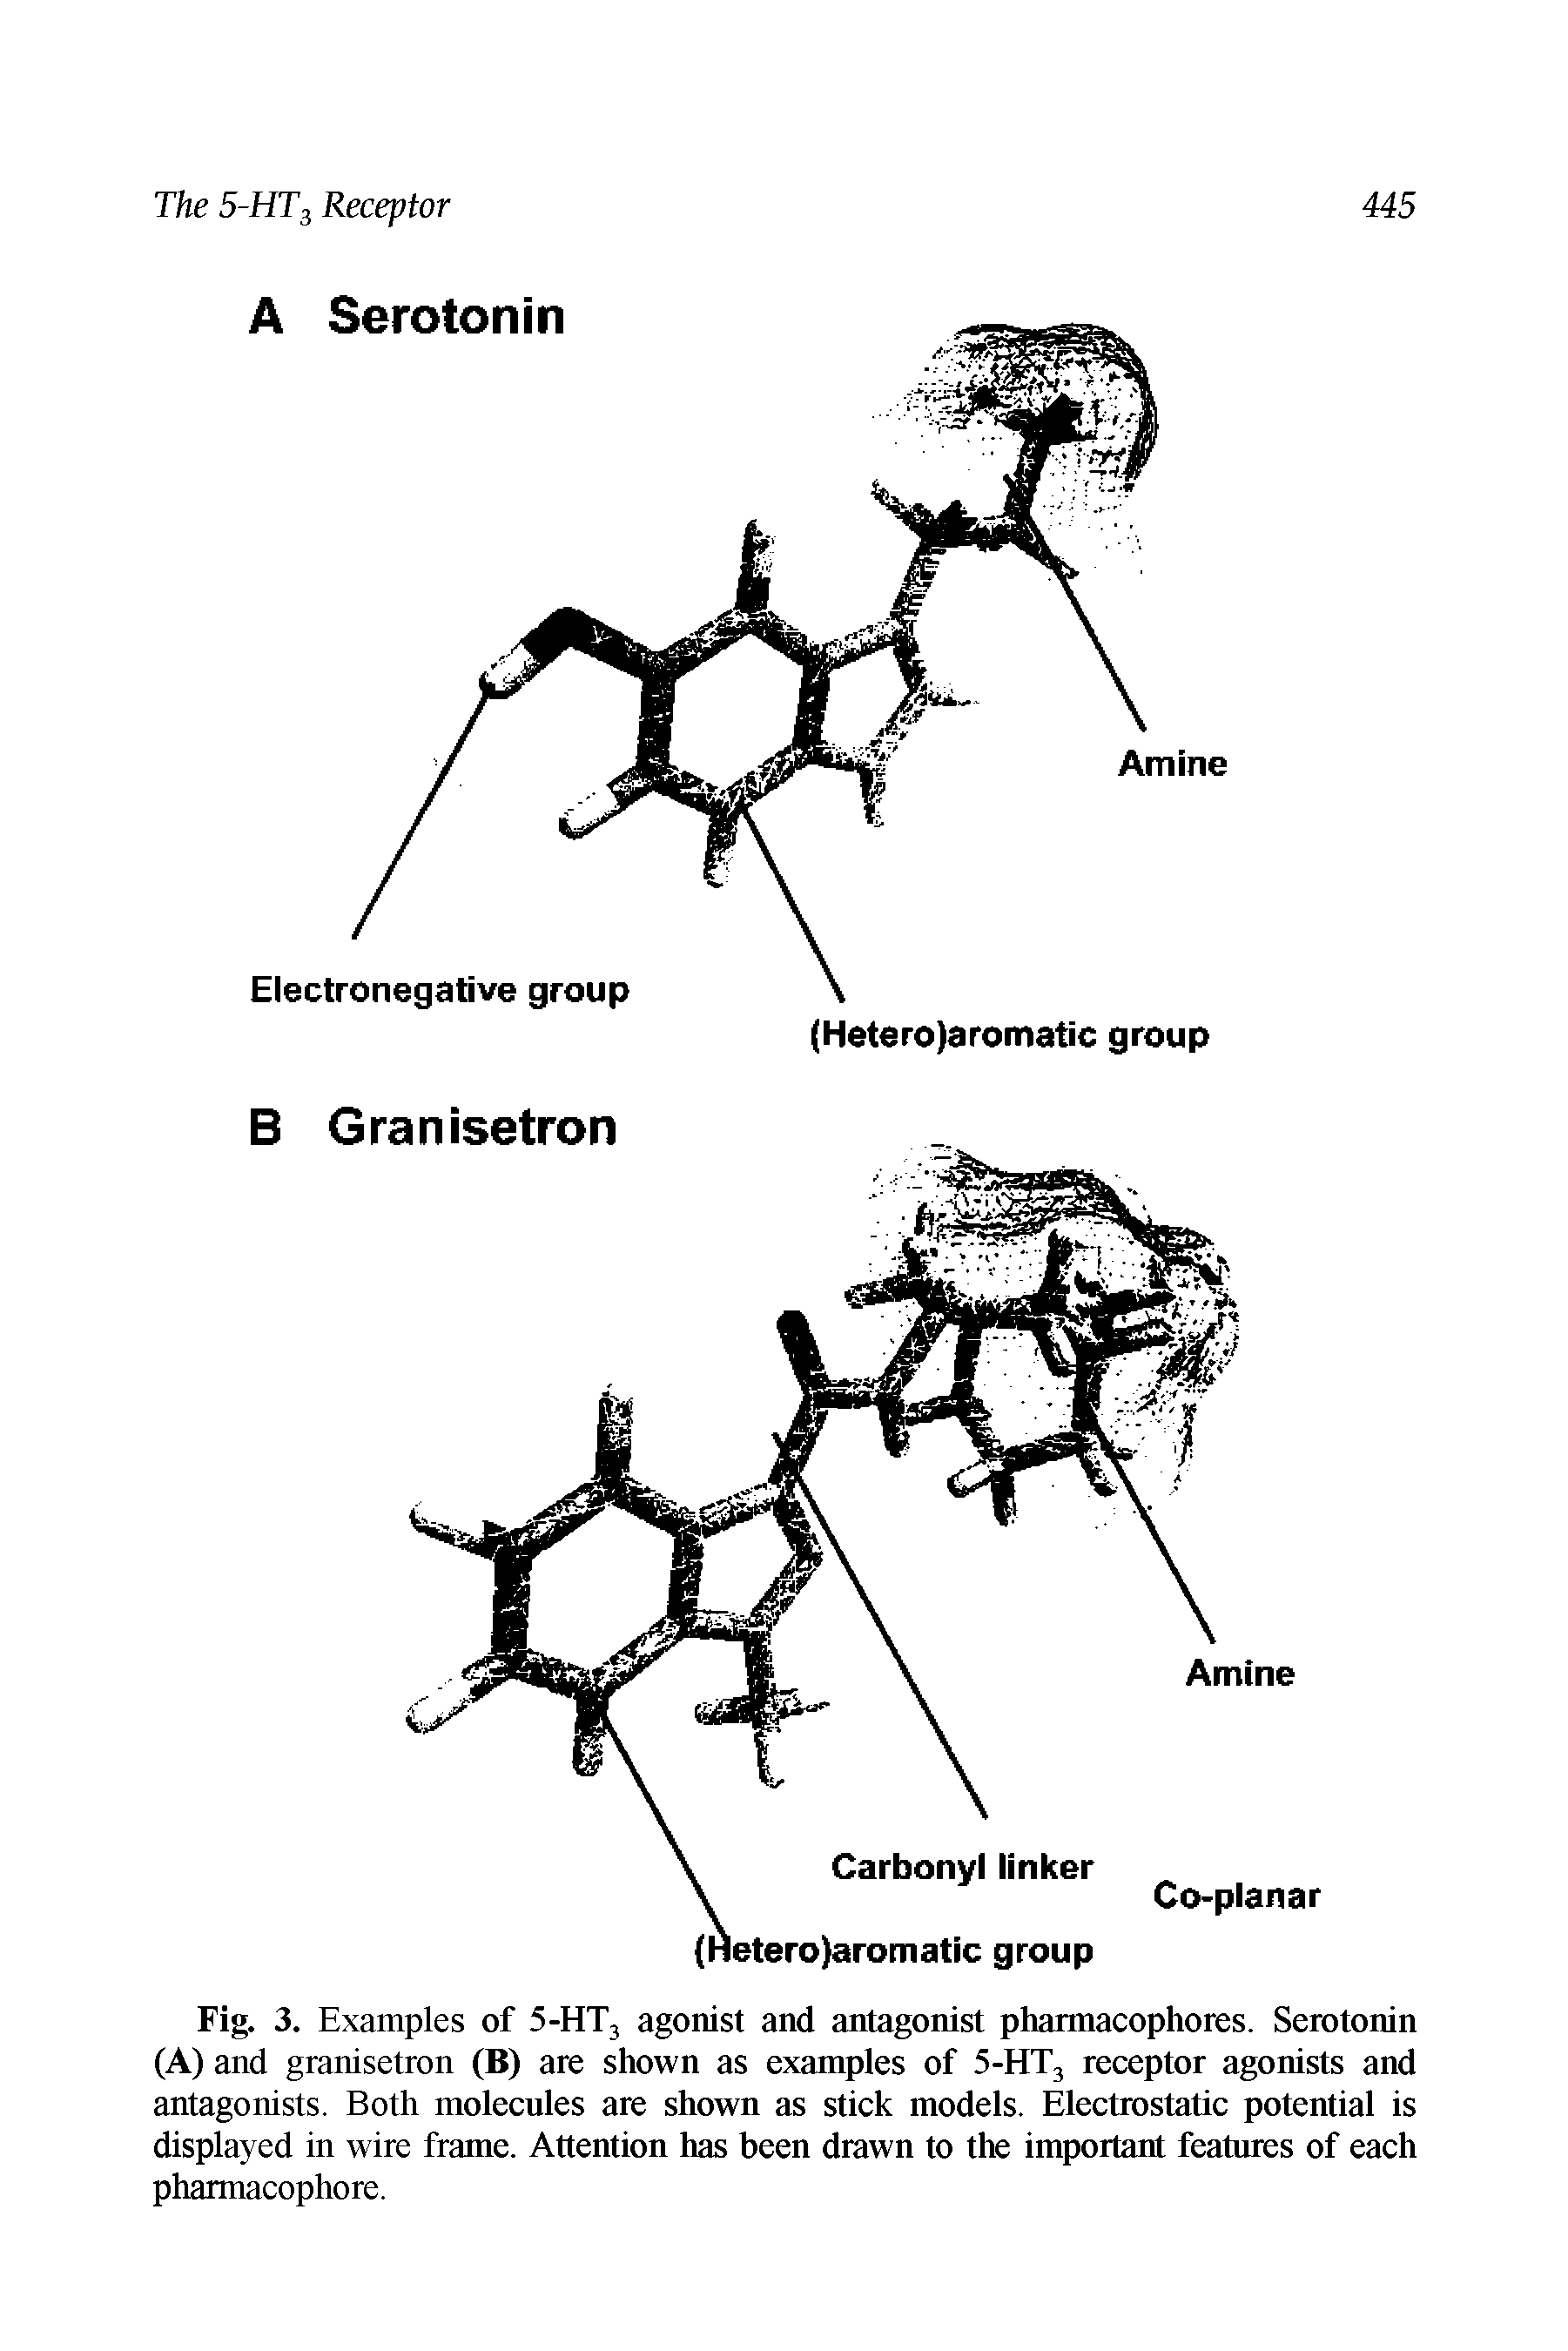 Fig. 3. Examples of 5-HT3 agonist and antagonist pharmacophores. Serotonin (A) and granisetron (B) are shown as examples of 5-HT3 receptor agonists and antagonists. Both molecules are shown as stick models. Electrostatic potential is displayed in wire frame. Attention has been drawn to the important features of each pharmacophore.